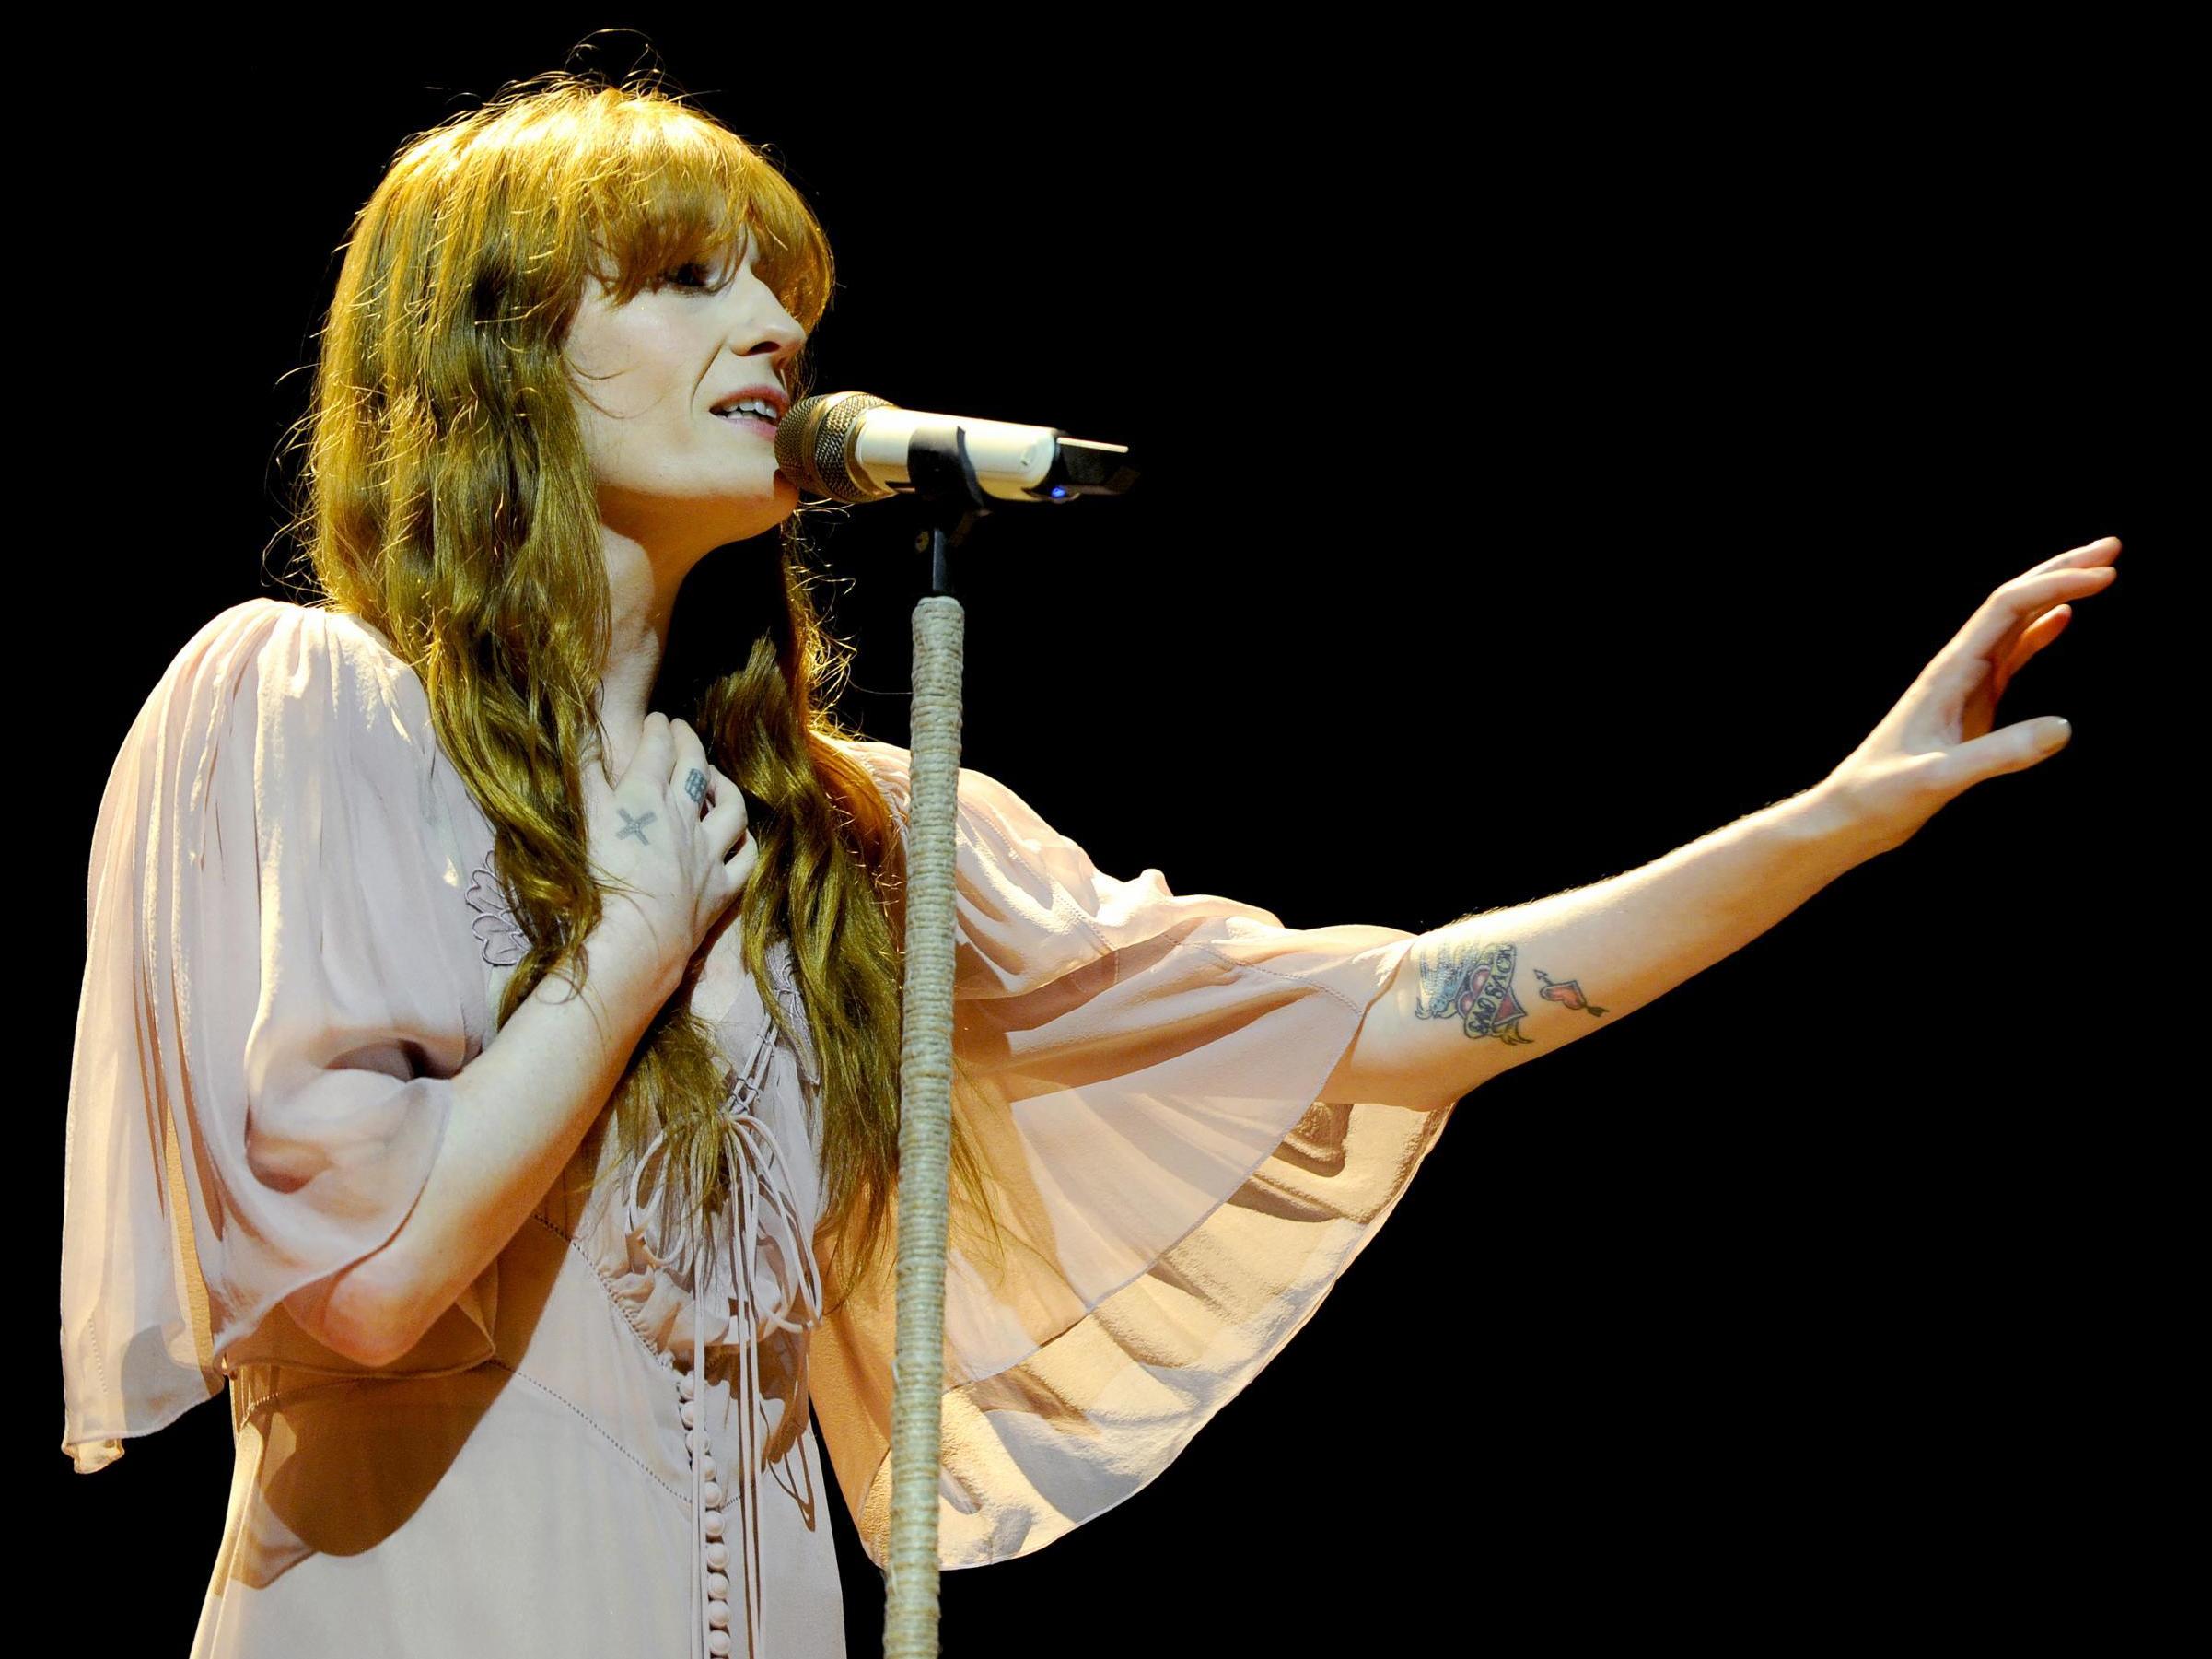 Florence + The Machine was one of the headliners scheduled to perform